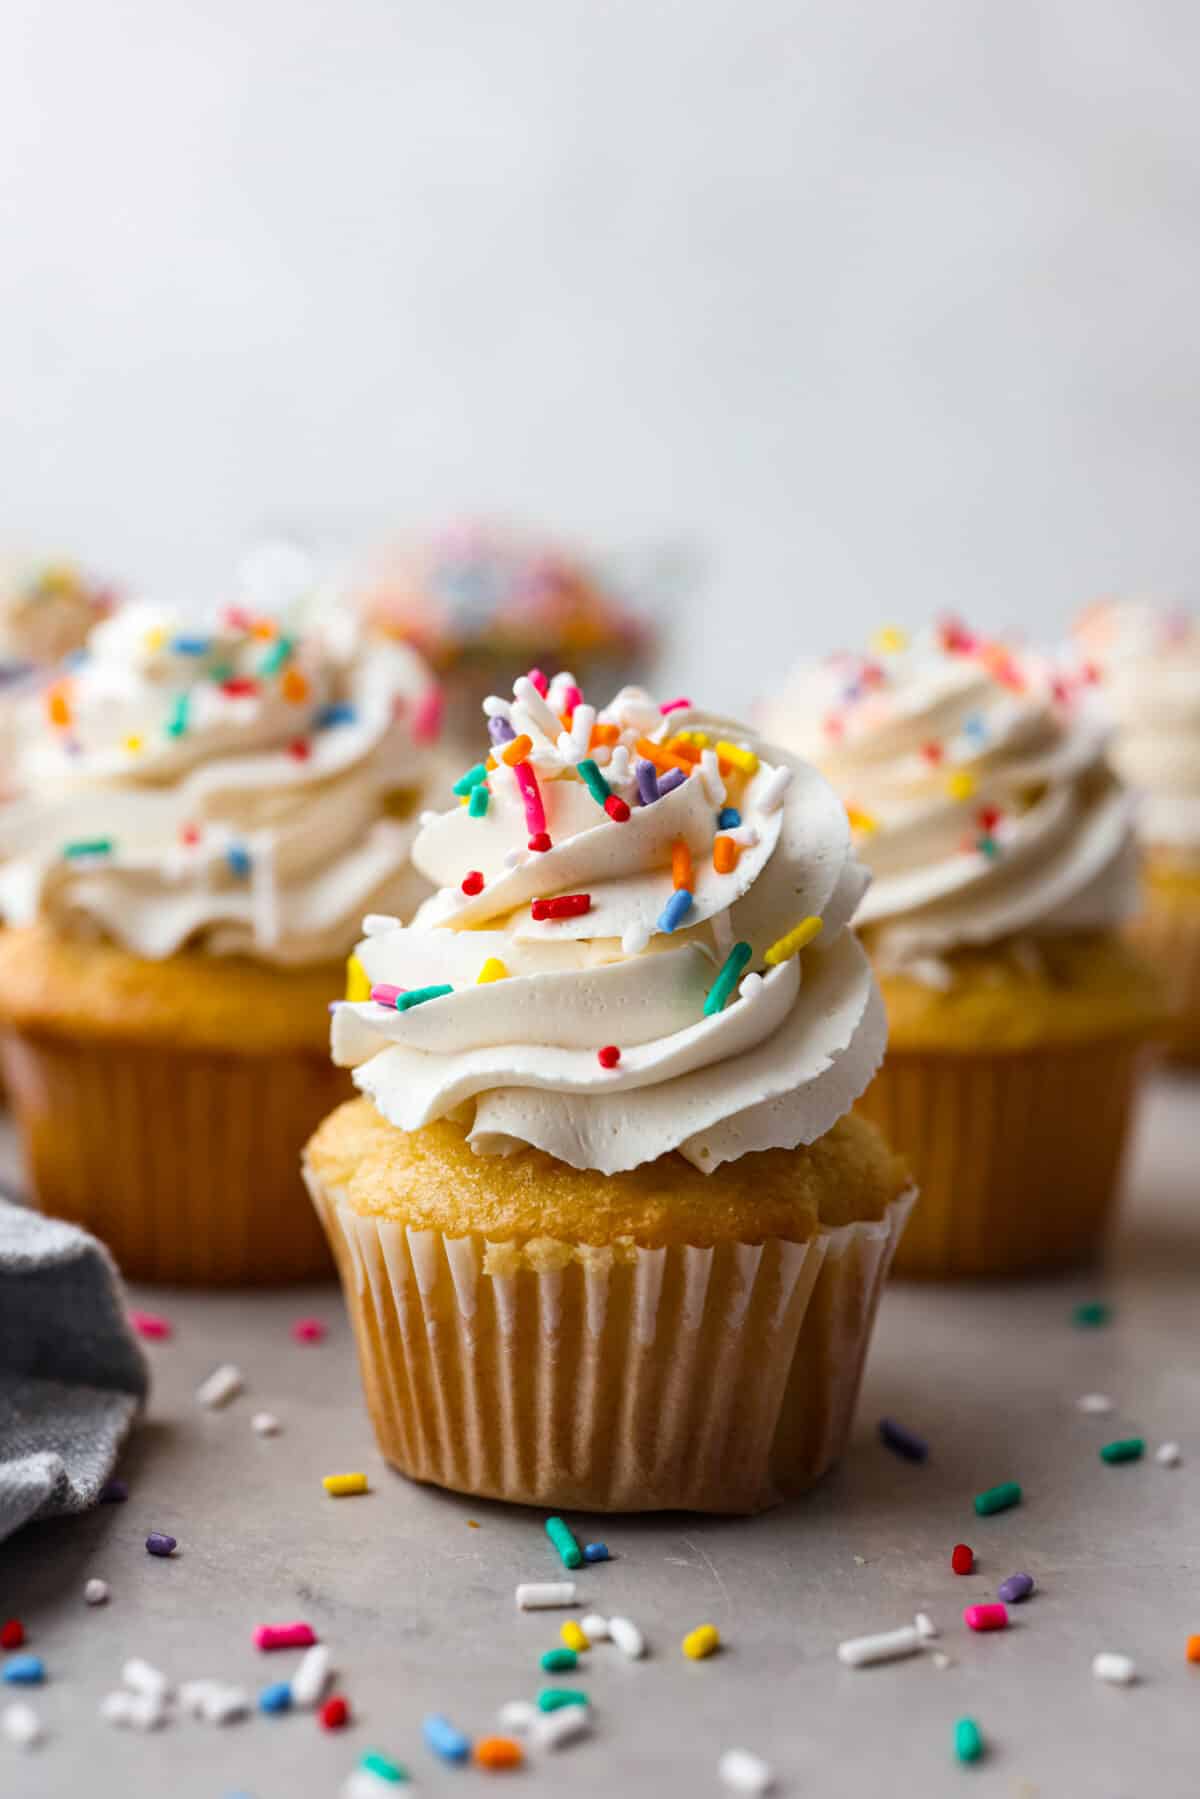 A cupcake frosted with meringue buttercream and topped with multicolored sprinkles - Swiss Meringue Buttercream